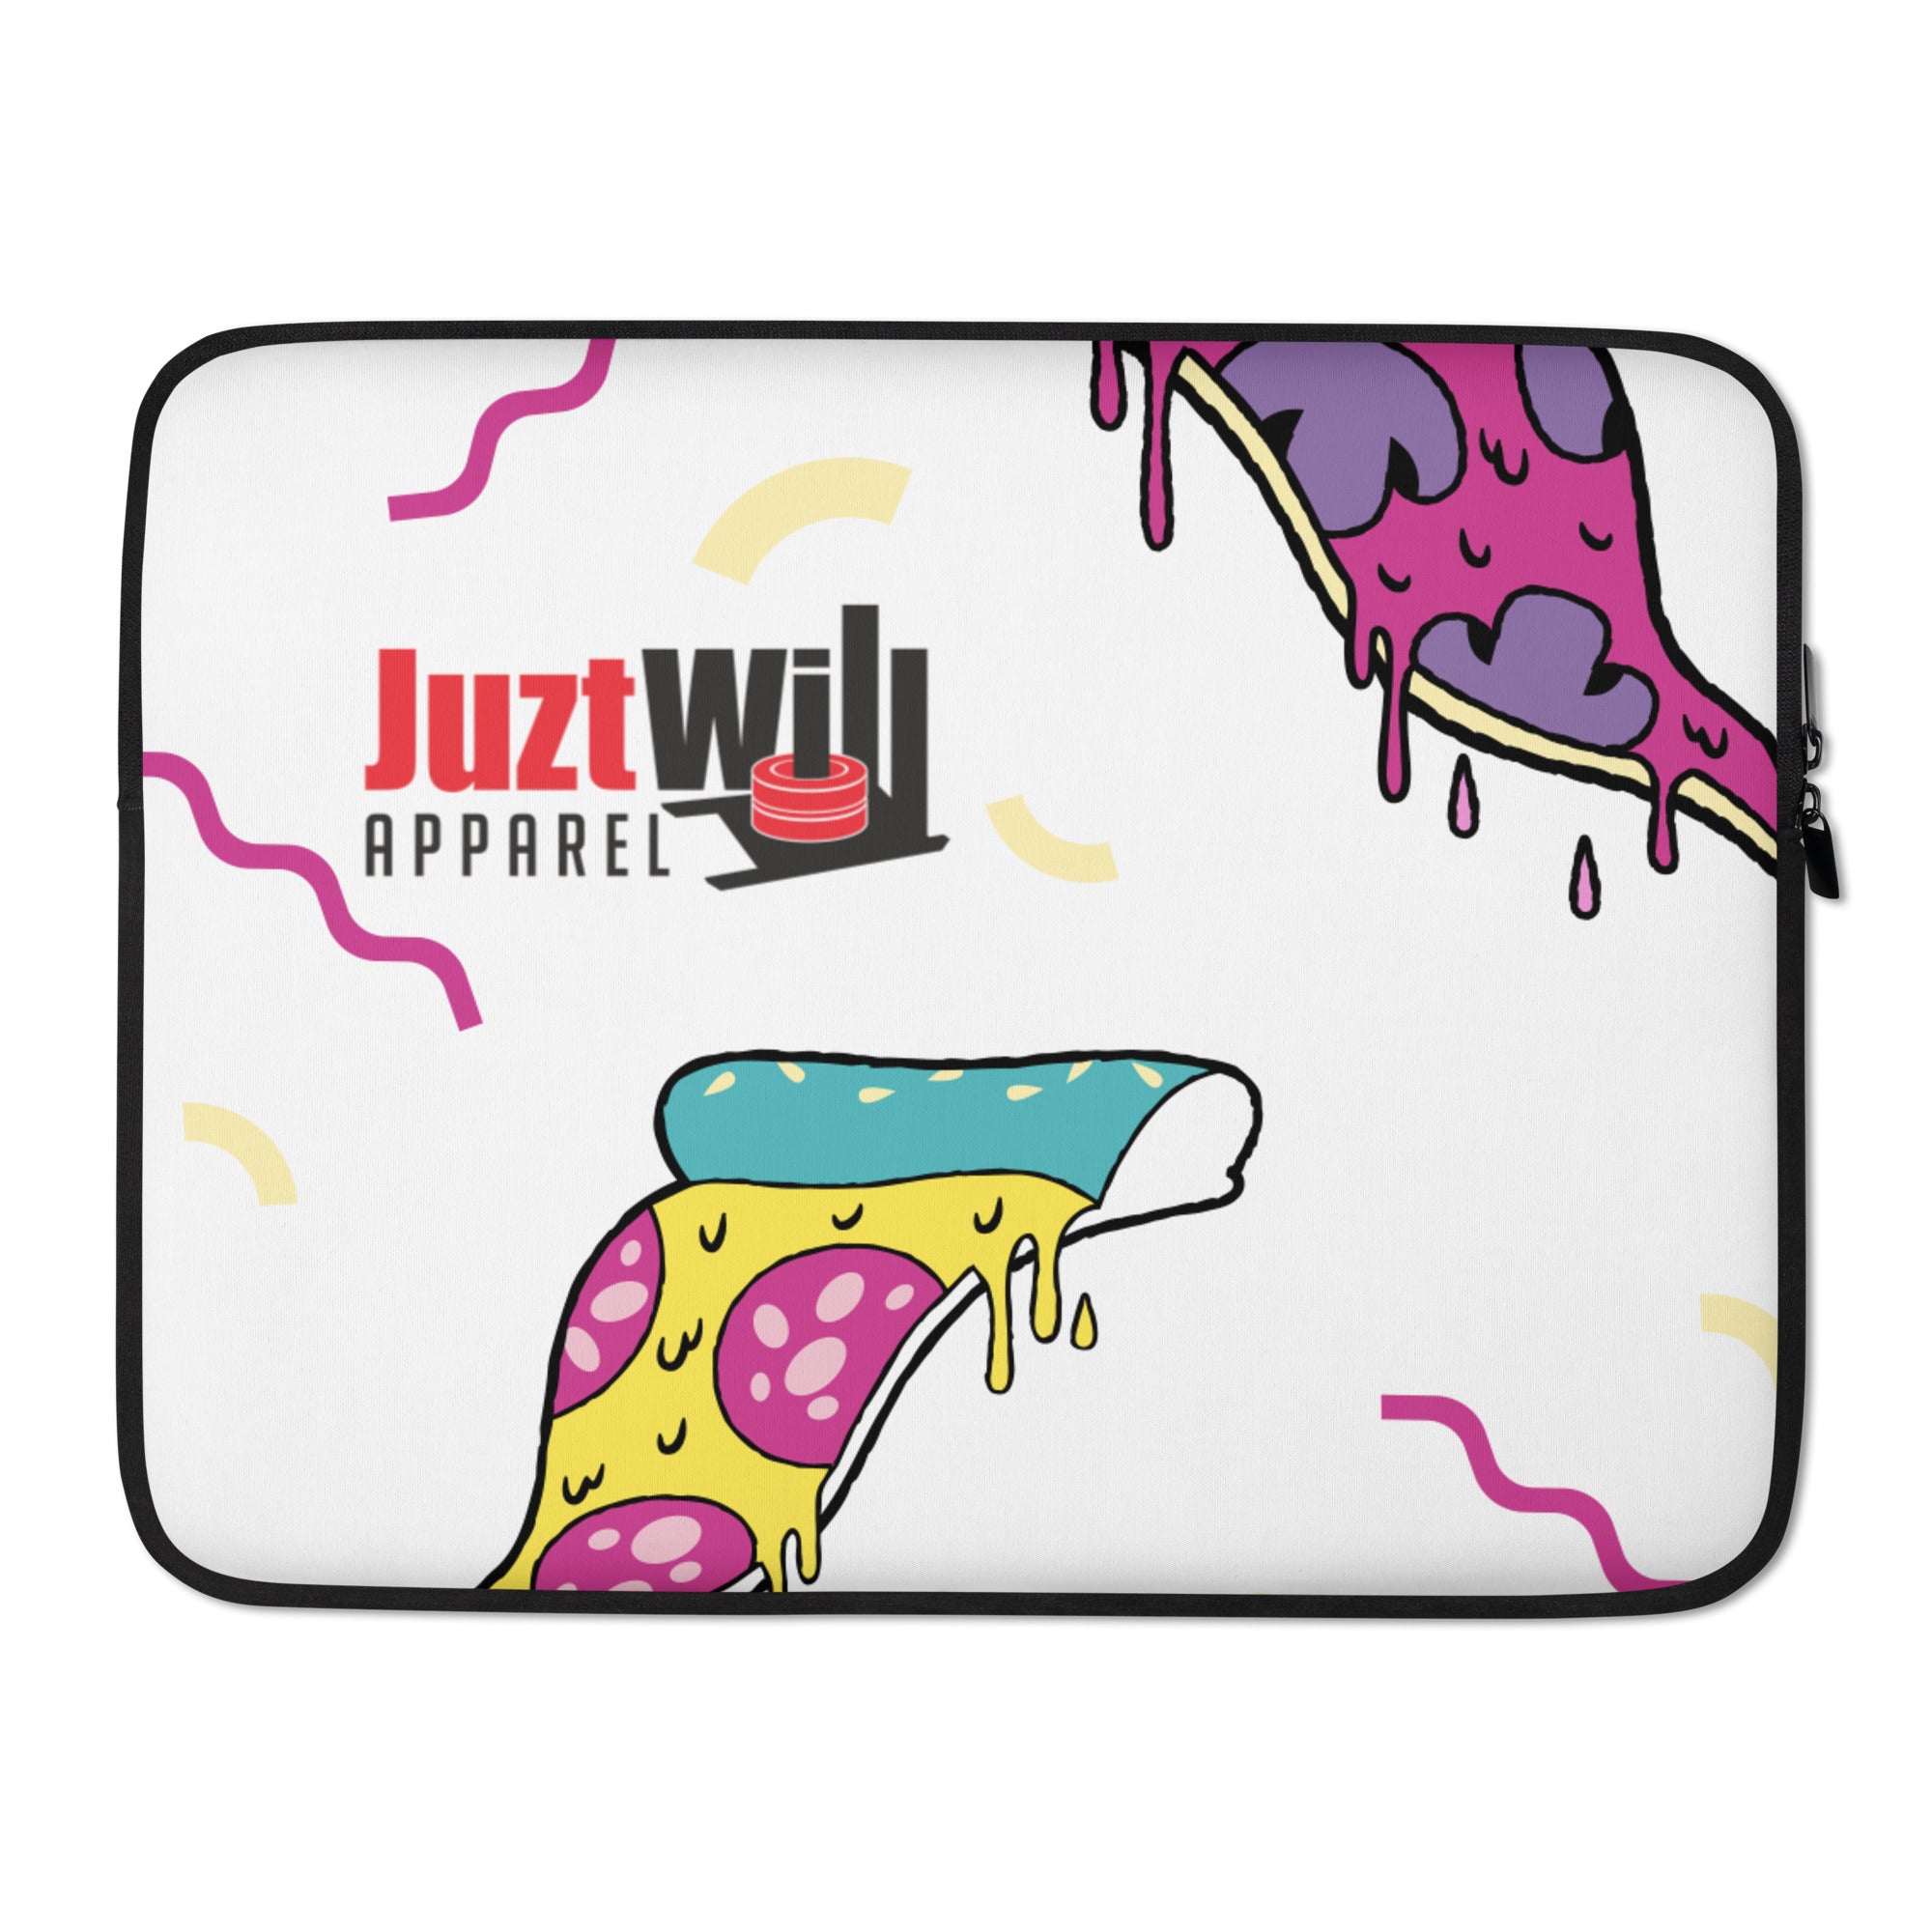 The Pizza Party Laptop Sleeve – Juzt Will Apparel